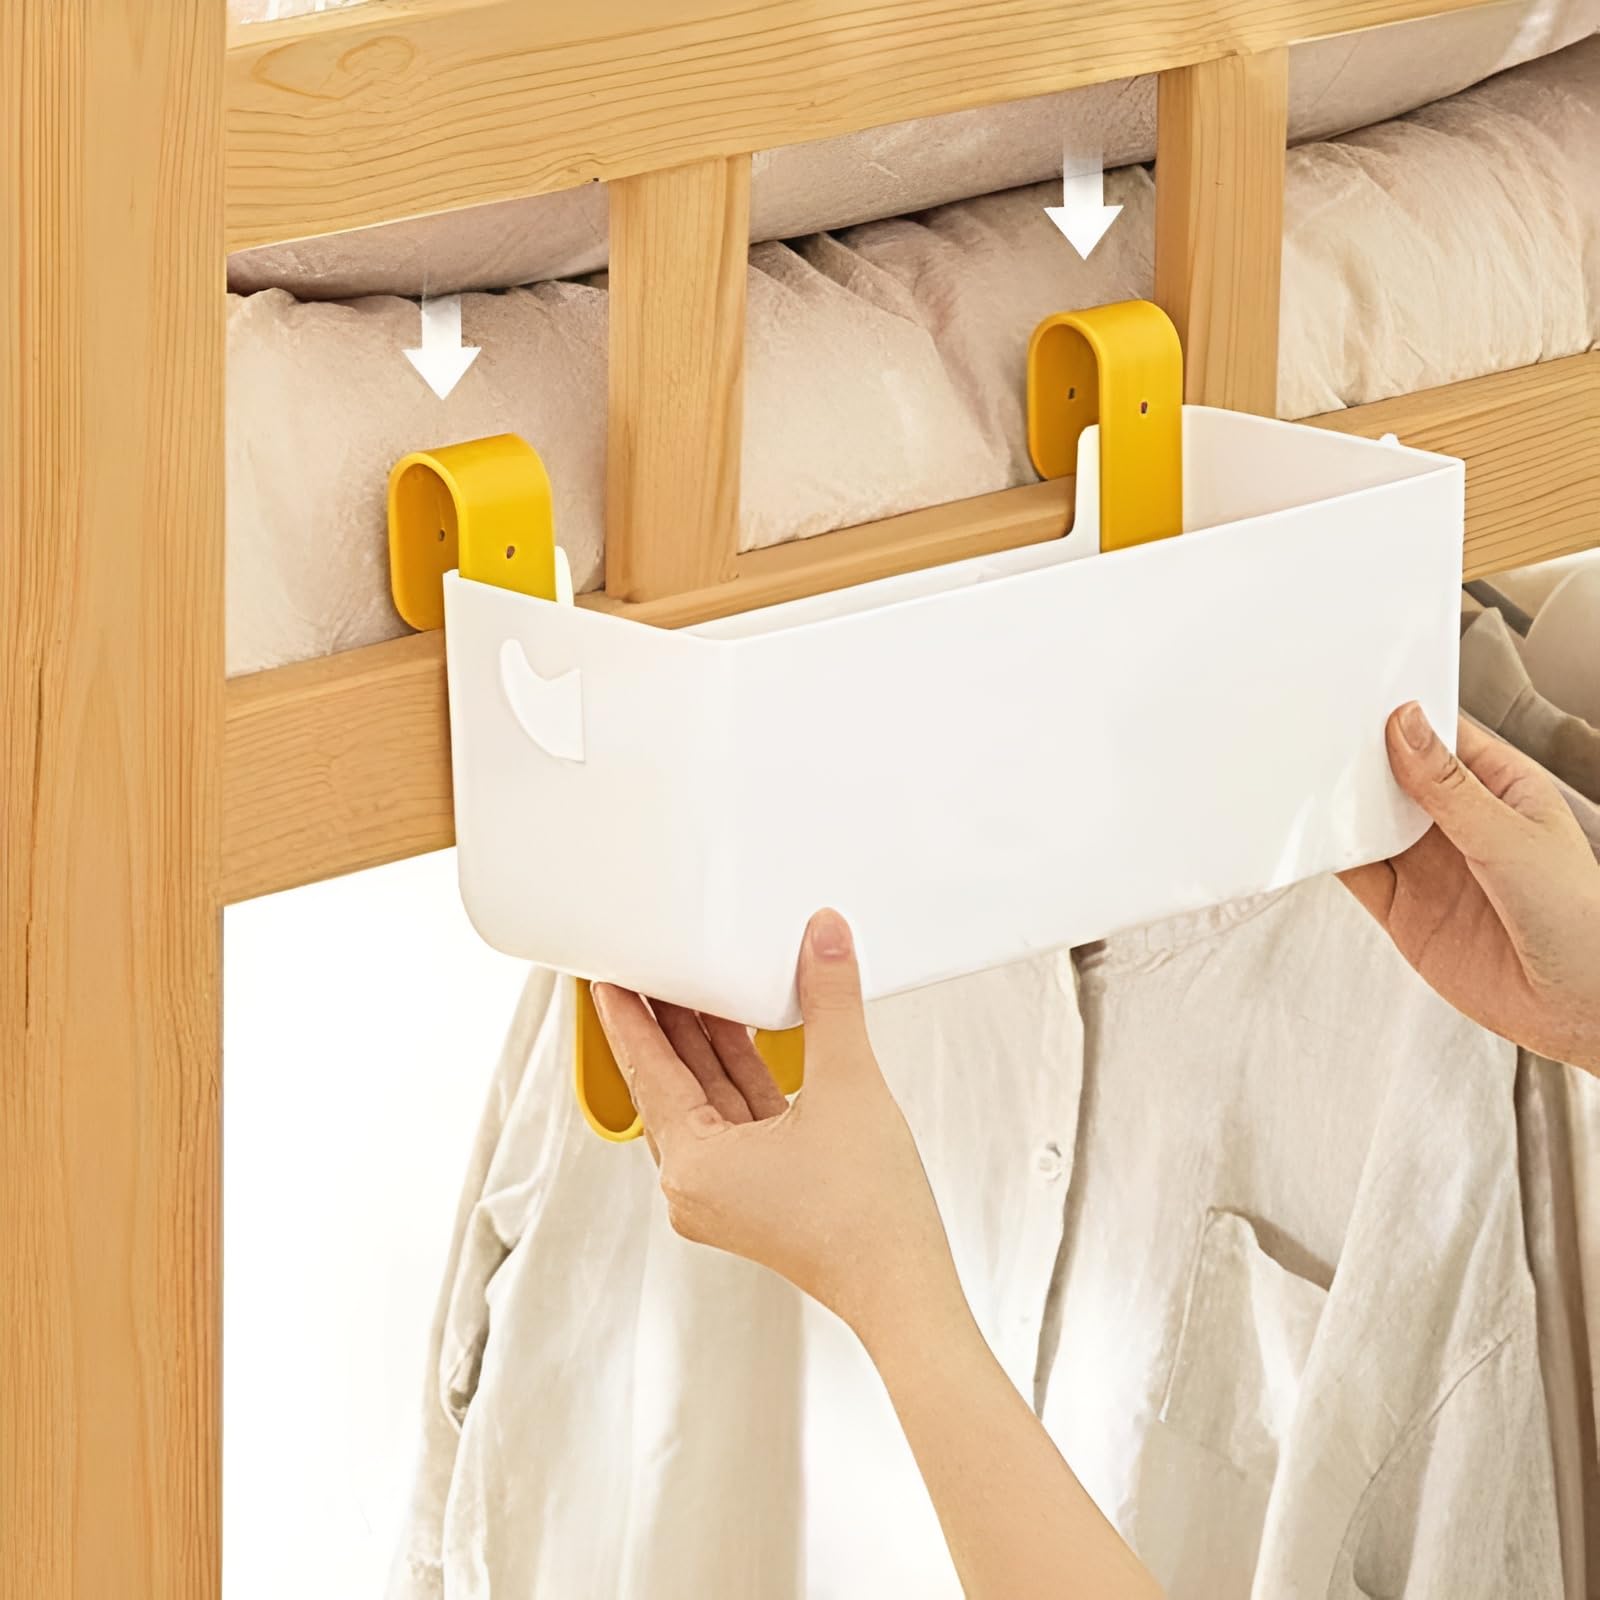 7UYUU Bunk Bed Shelf Bunk Bed Storage Caddy Accessories for Top Bunk Bedside Caddy Shelf for Dorm Bed Plastic Bunk Bed Hooks Decoration for Hanging in Loft Rv Camper - White